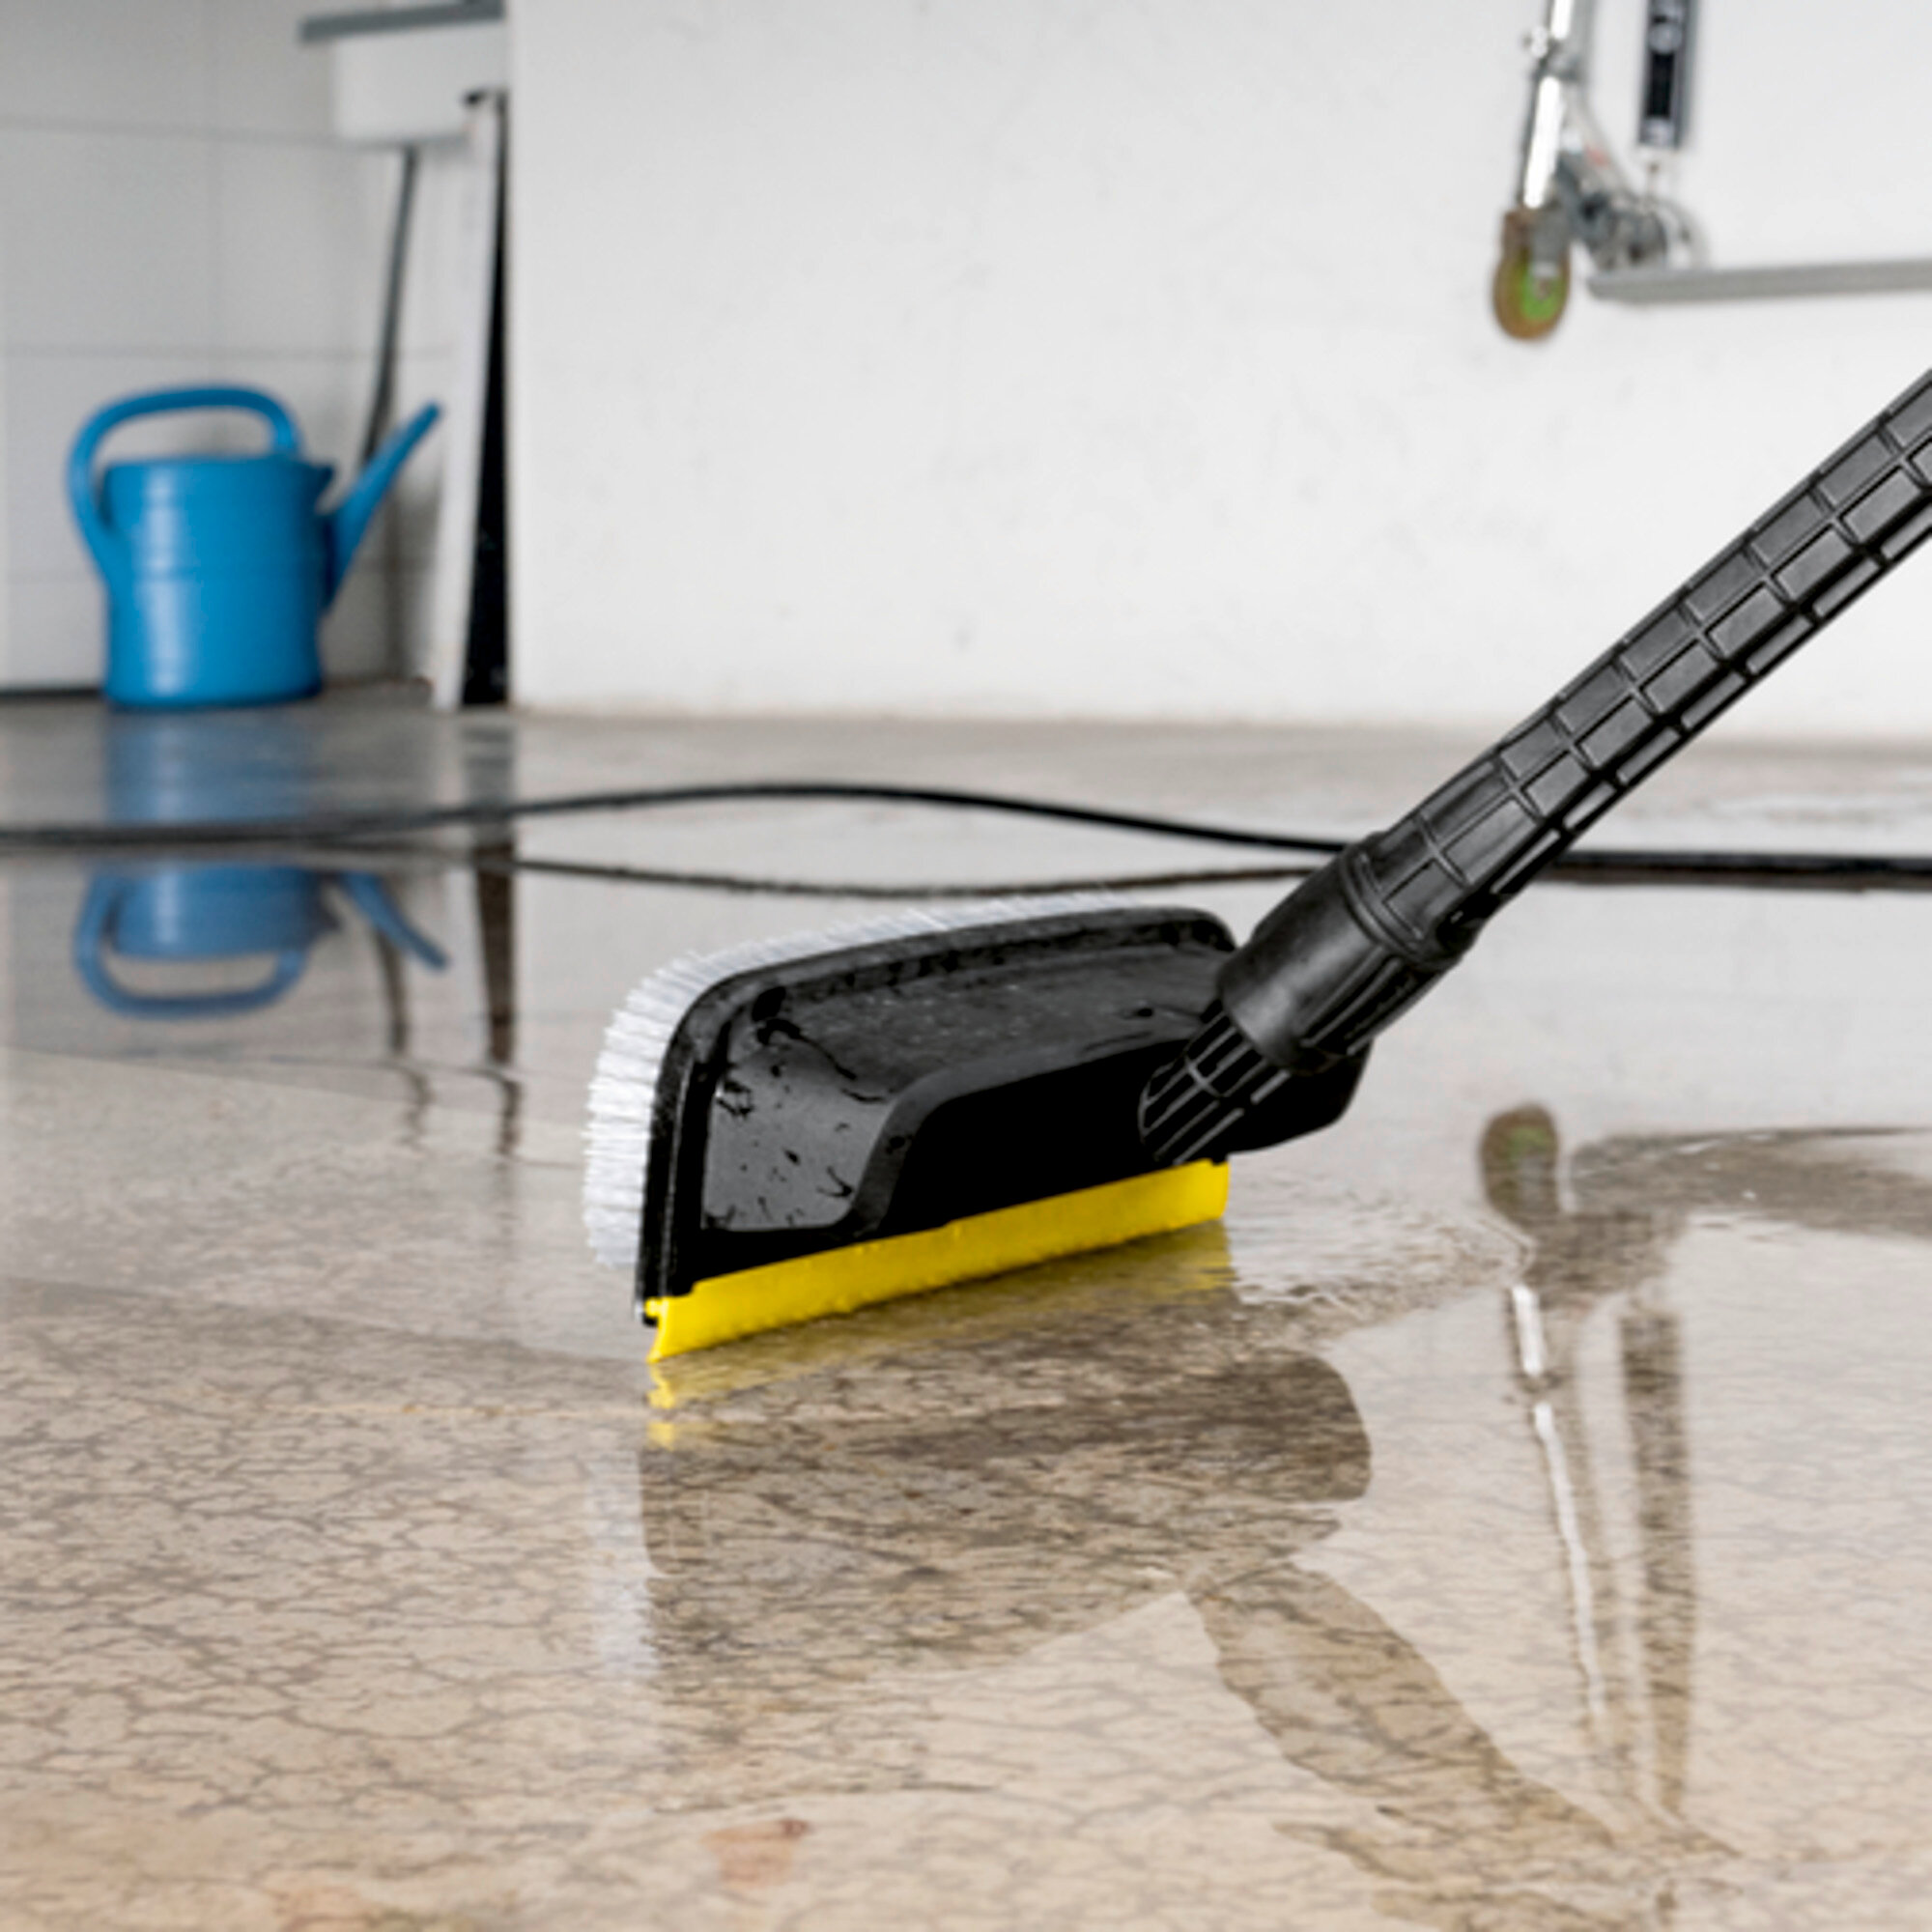  PS 30 power scrubber surface cleaner: Integrated exchangeable squeegee blade